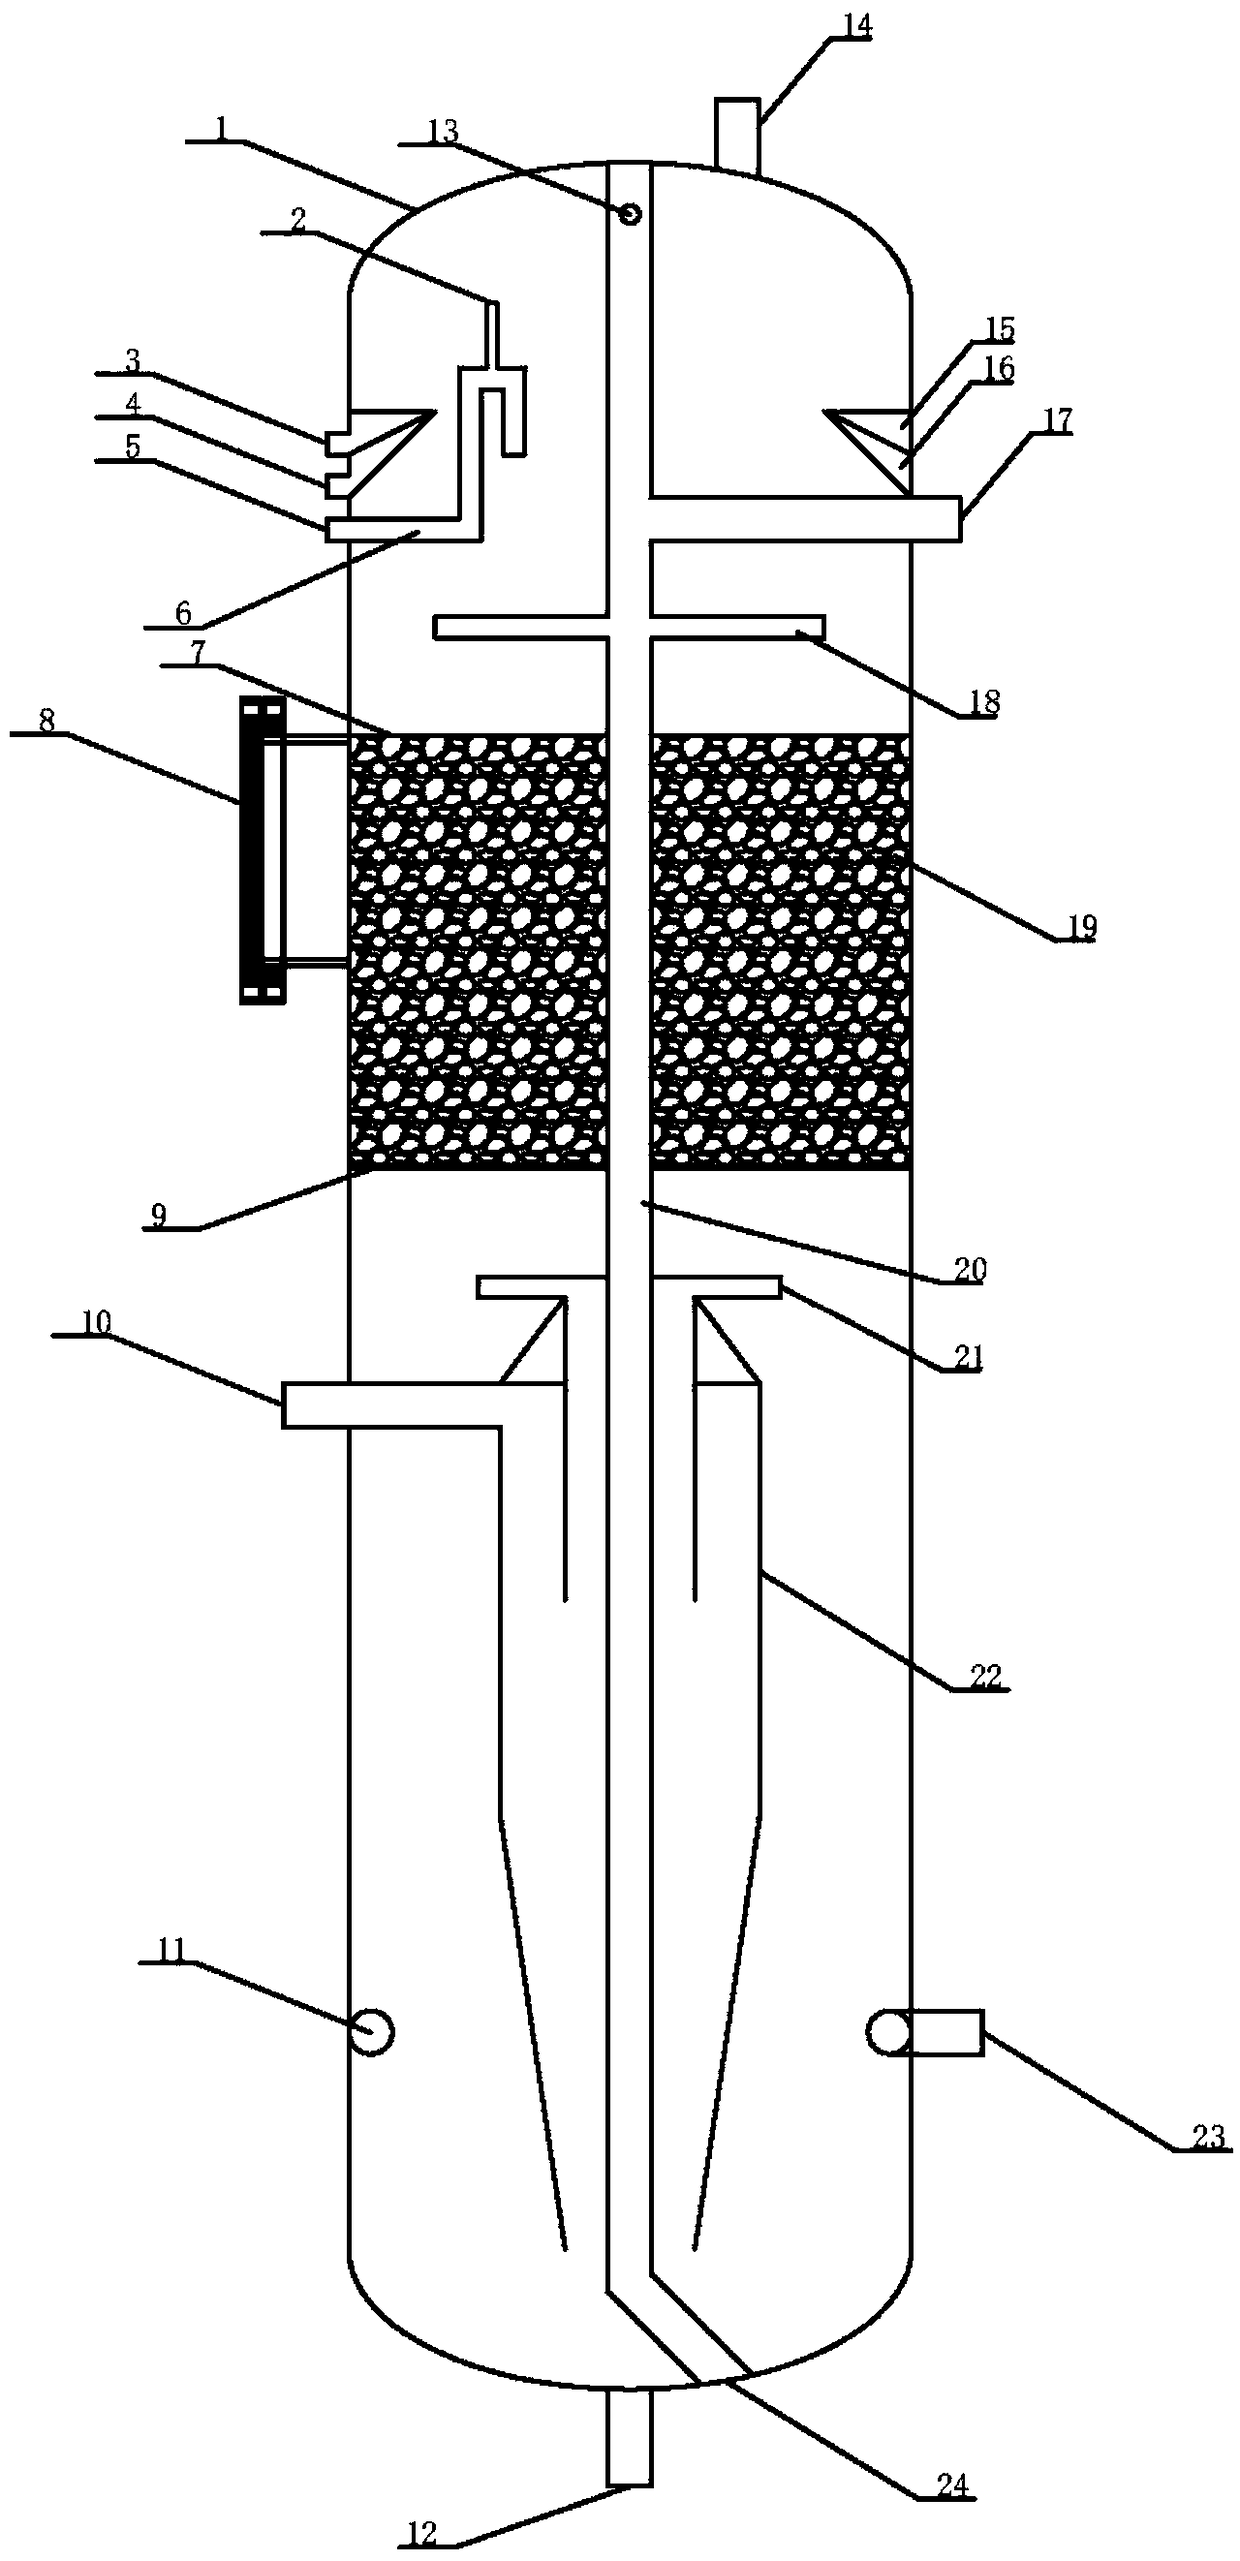 Central cylinder cyclone separation and sedimentation device